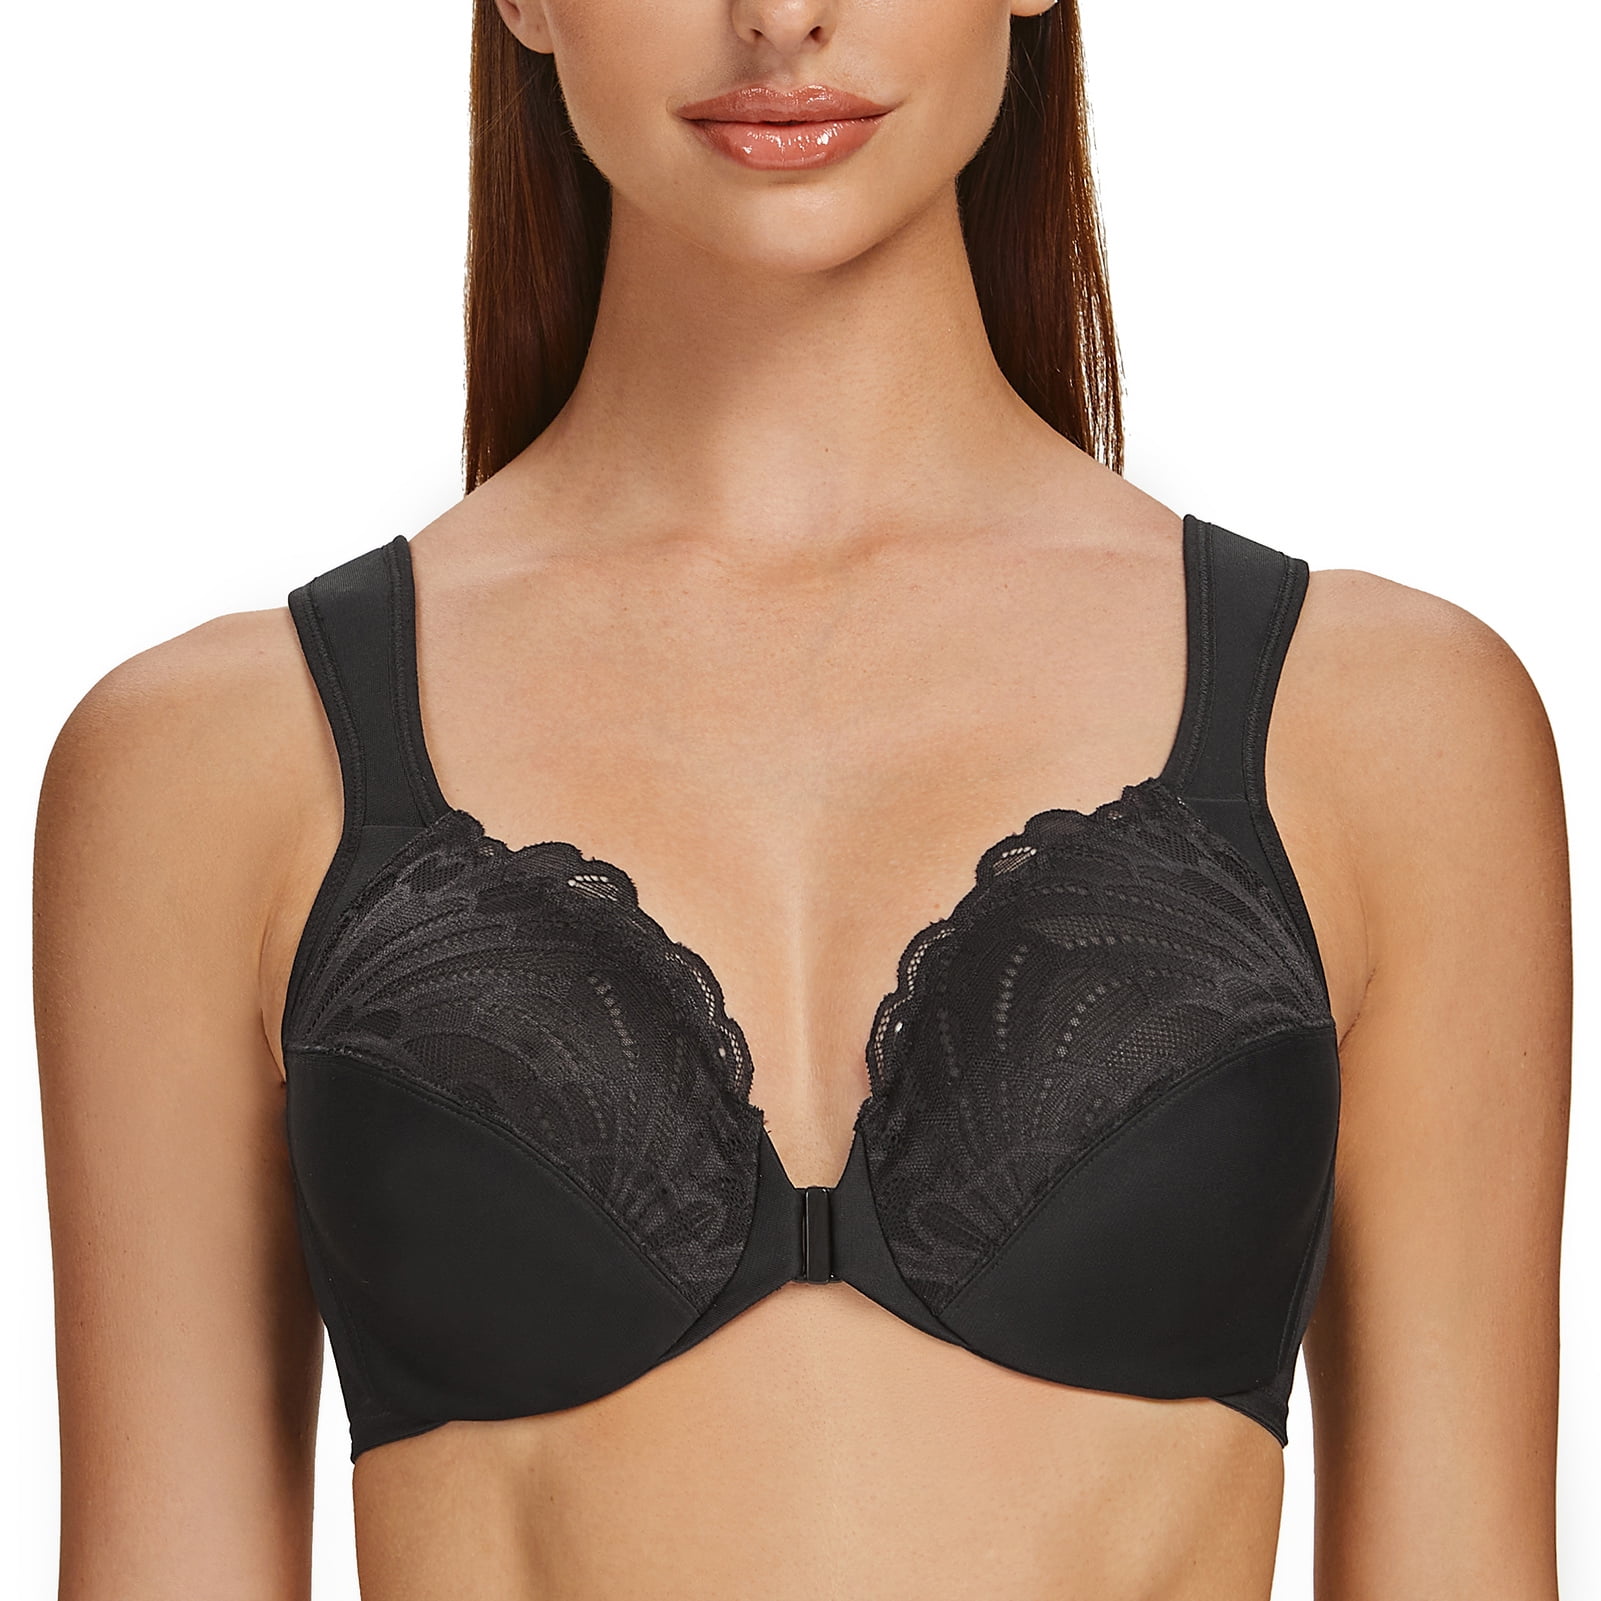 MELENECA Underwire Front Closure Bras for Women Pale Nude 34F 